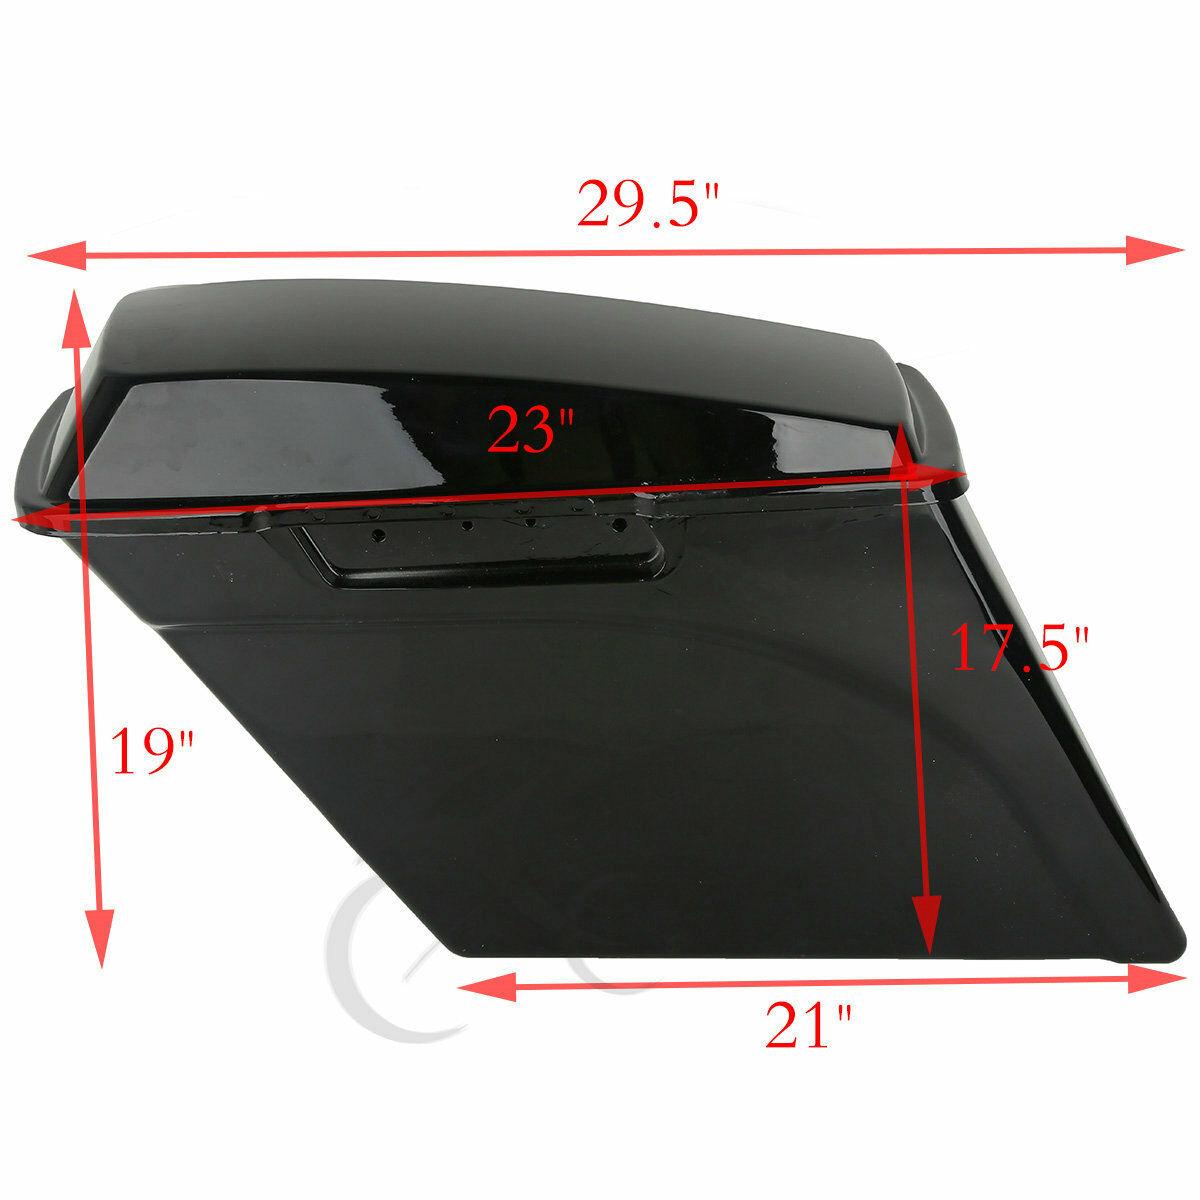 5" Stretched Extended Saddle Bags Trunk Fit For Harley Street Glide FLHX 93-13 - Moto Life Products